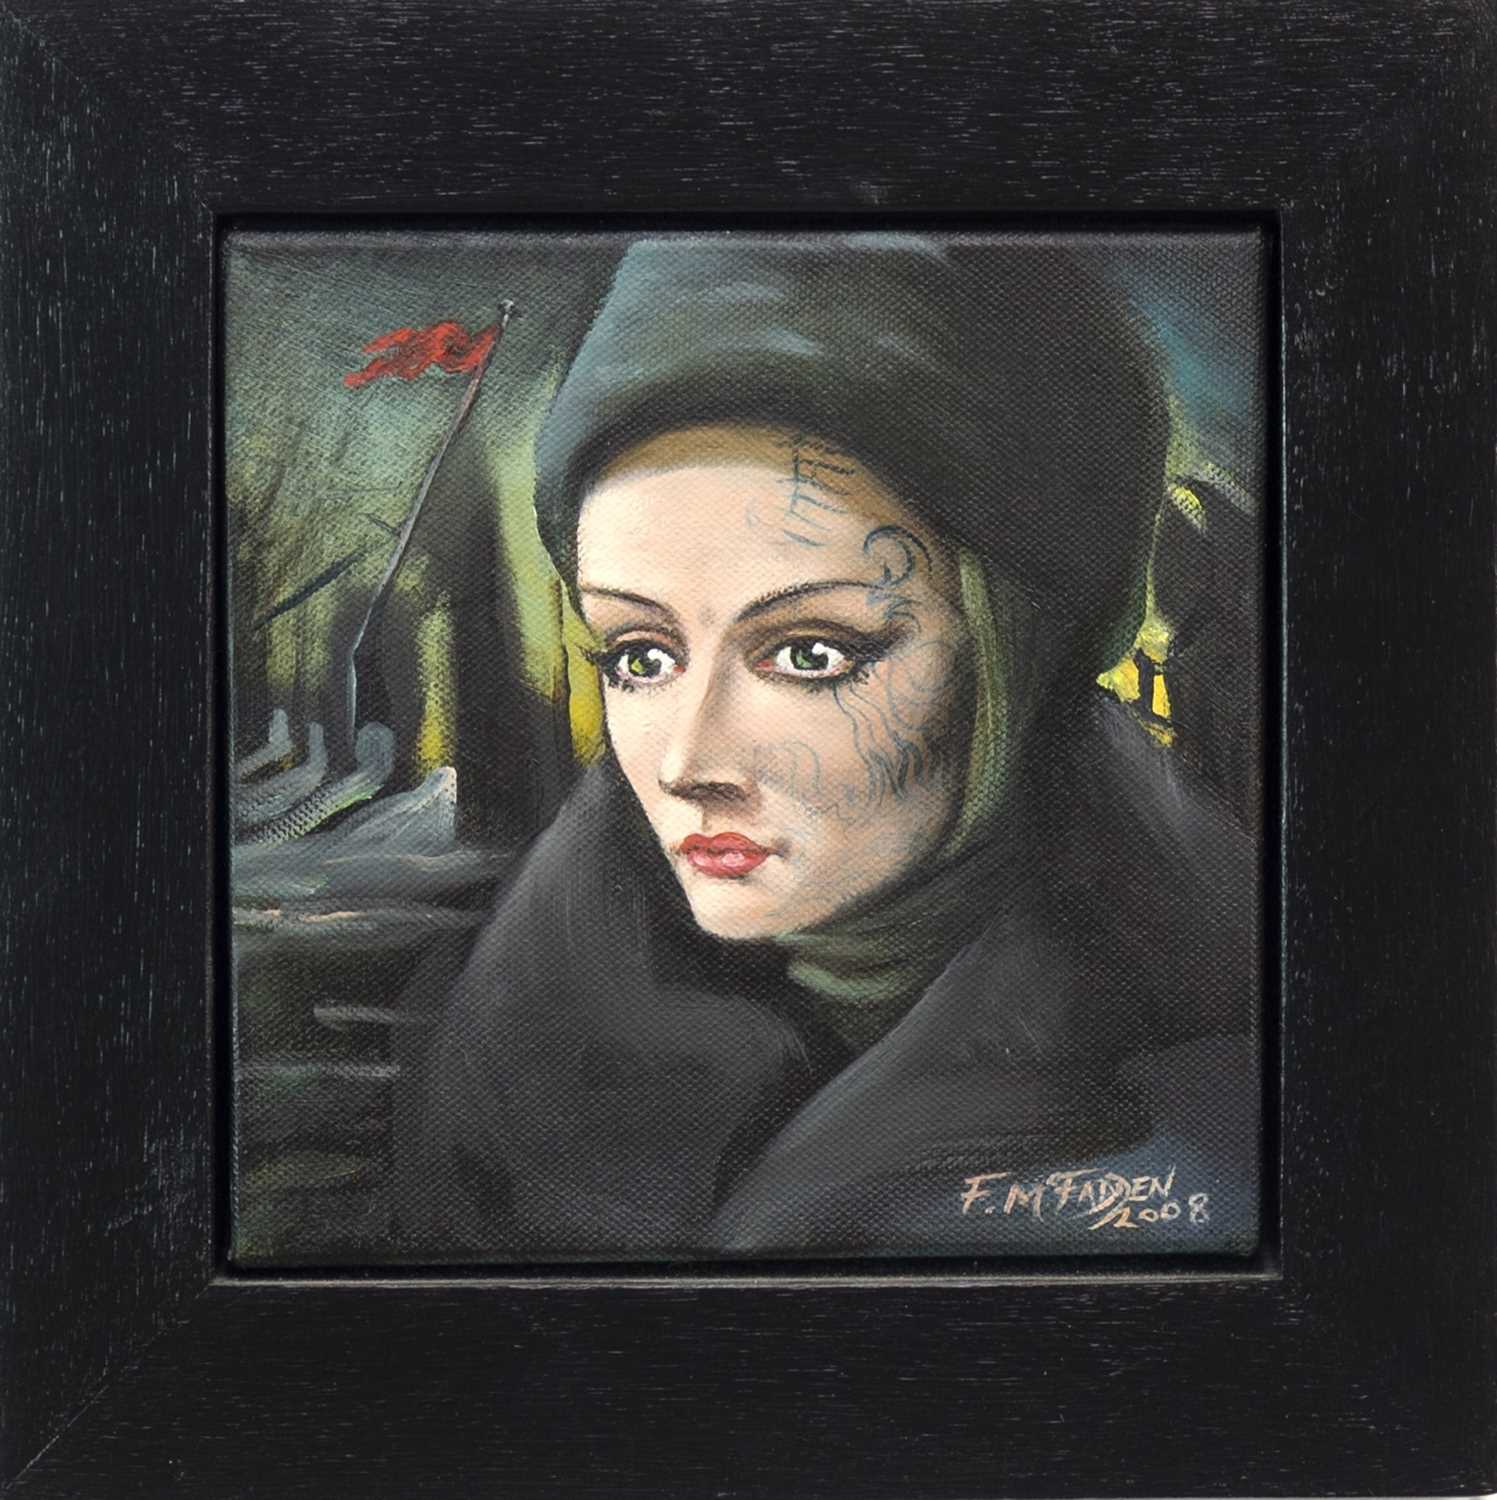 Lot 645 - THE QUEEN OF DARKNESS, BY FRANK MCFADDEN